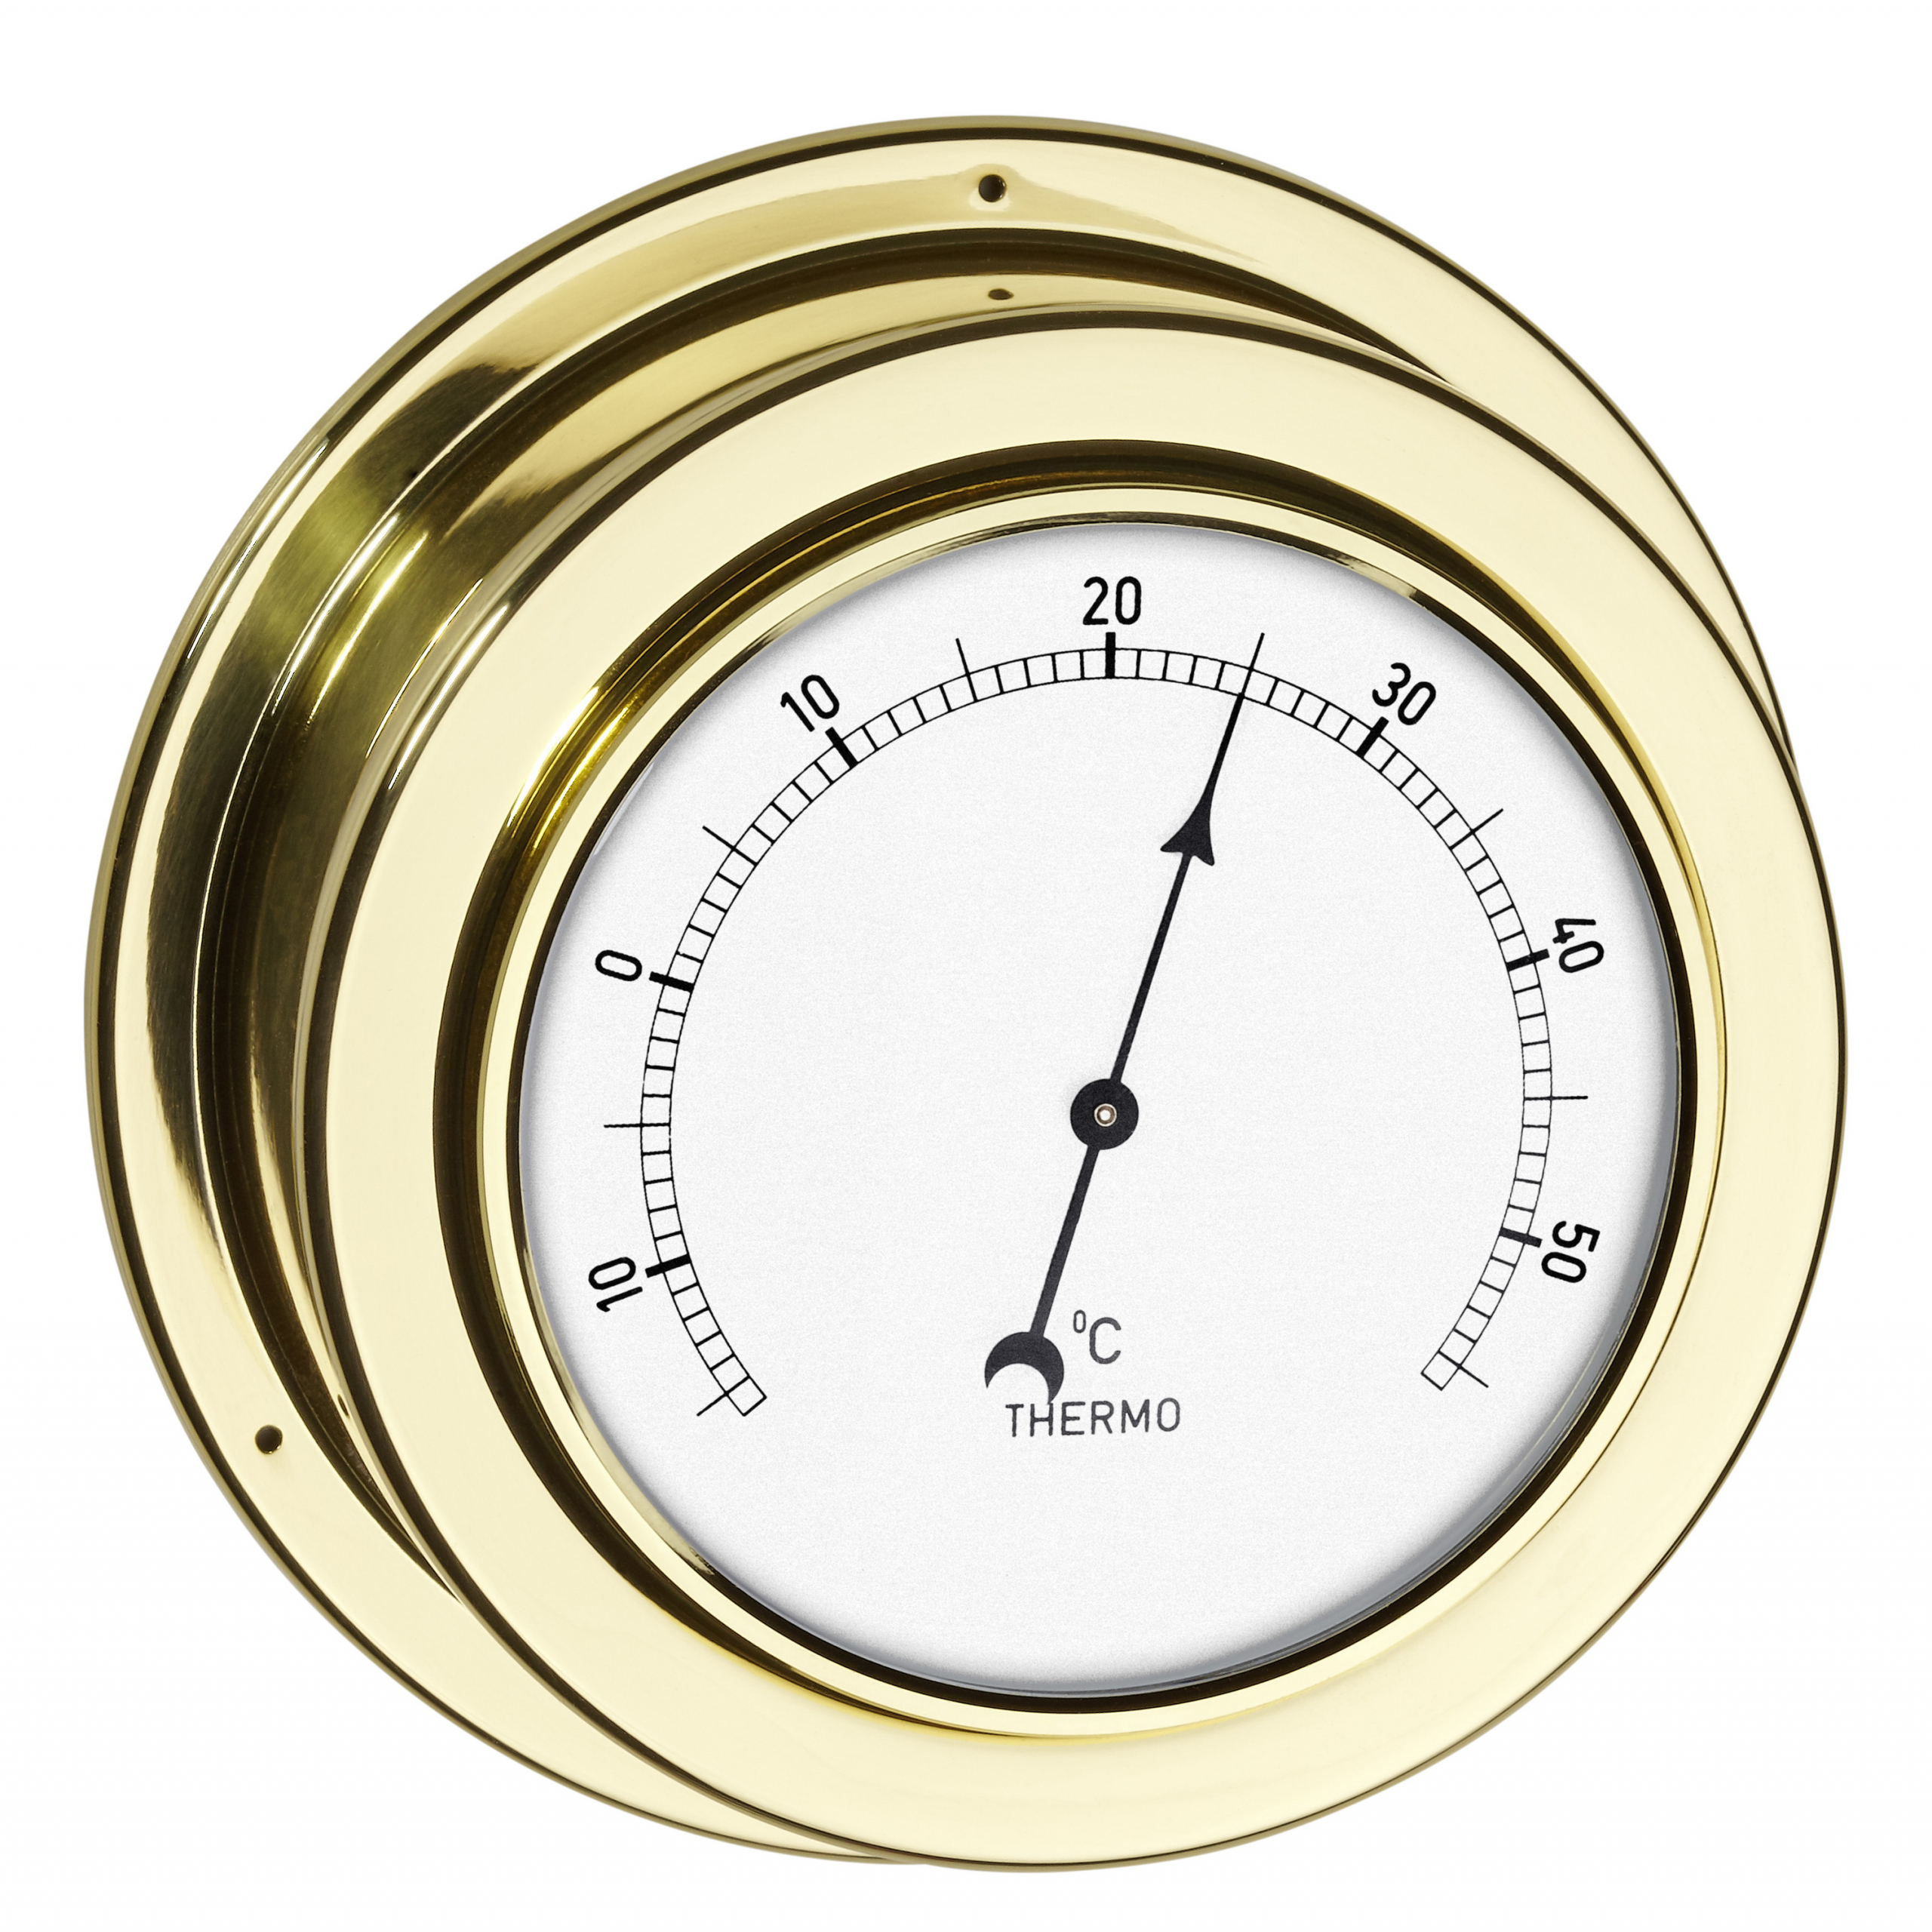 19-2015-analoges-thermometer-messing-maritim-1200x1200px.jpg